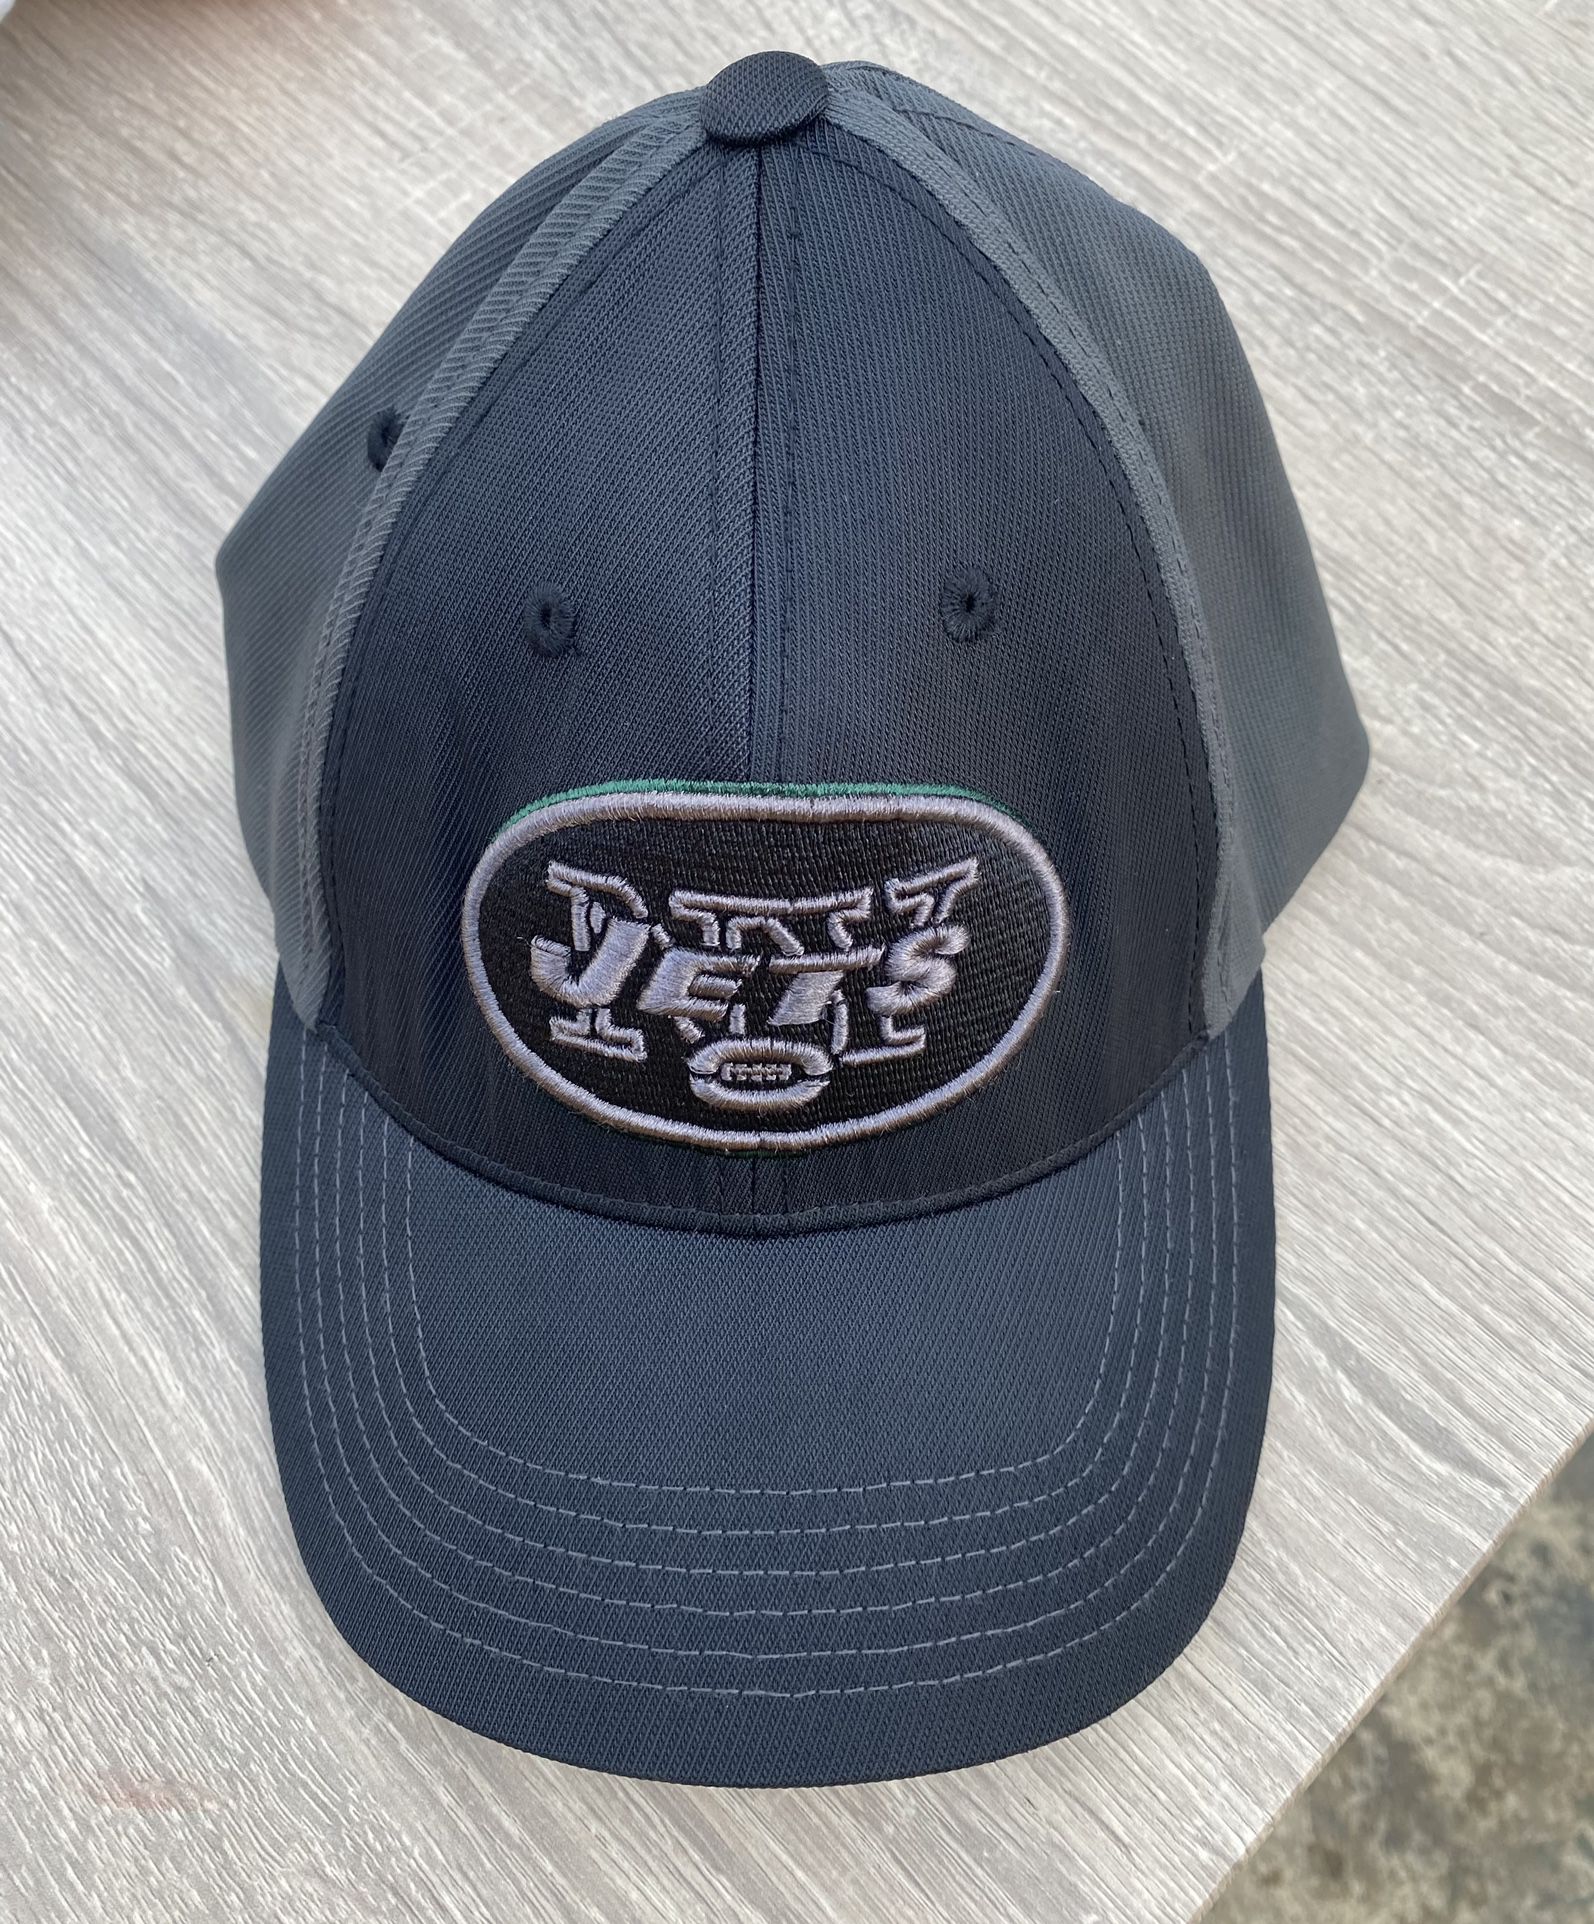 NFL Team Apparel New York Jets Black Gray Adult Hat One Size Fits Most 